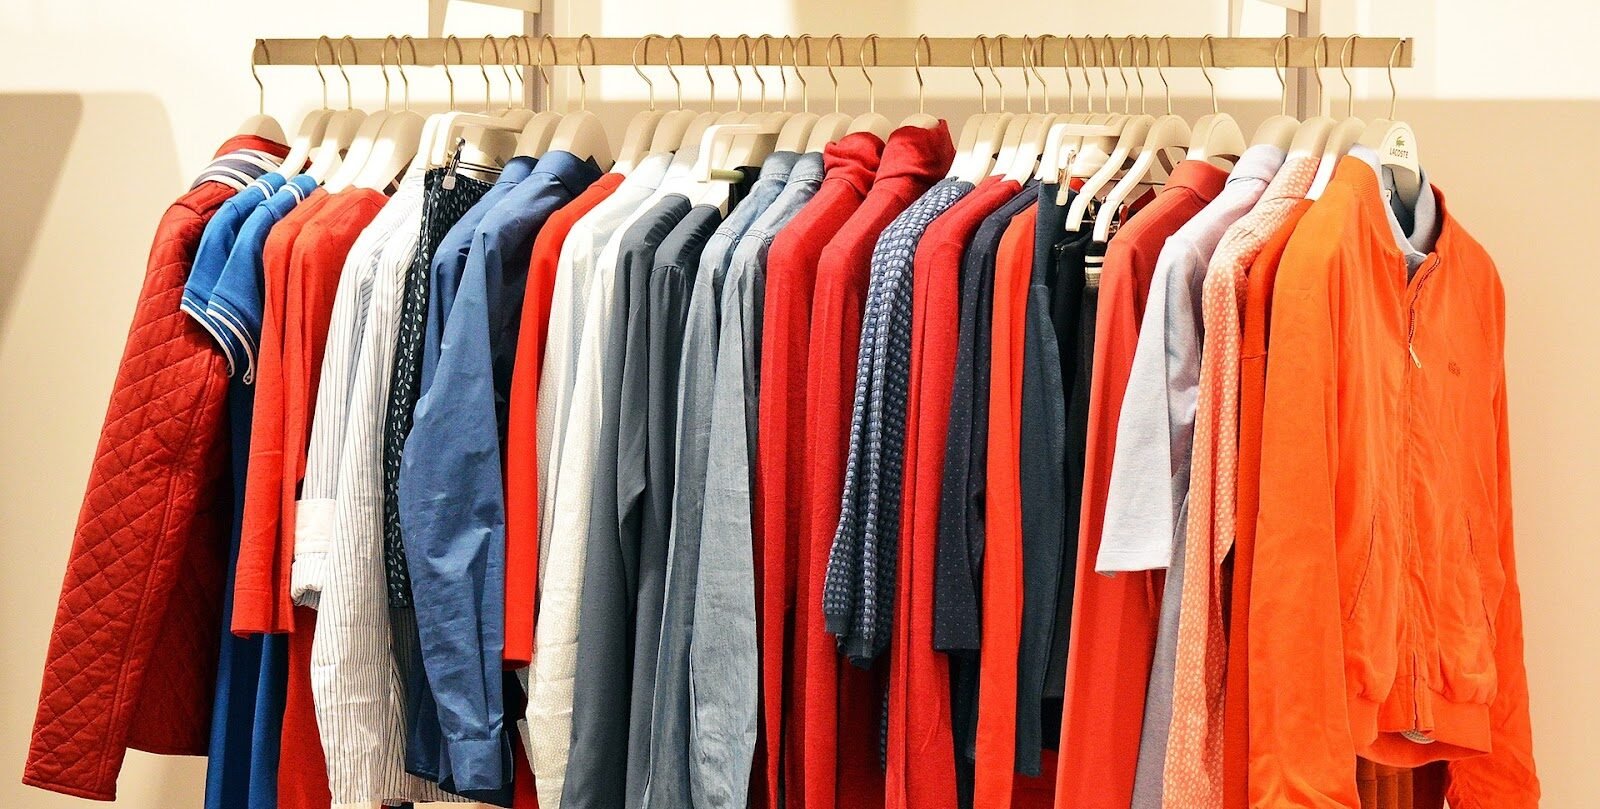 Clothes hanging from a hanger - best small business ideas